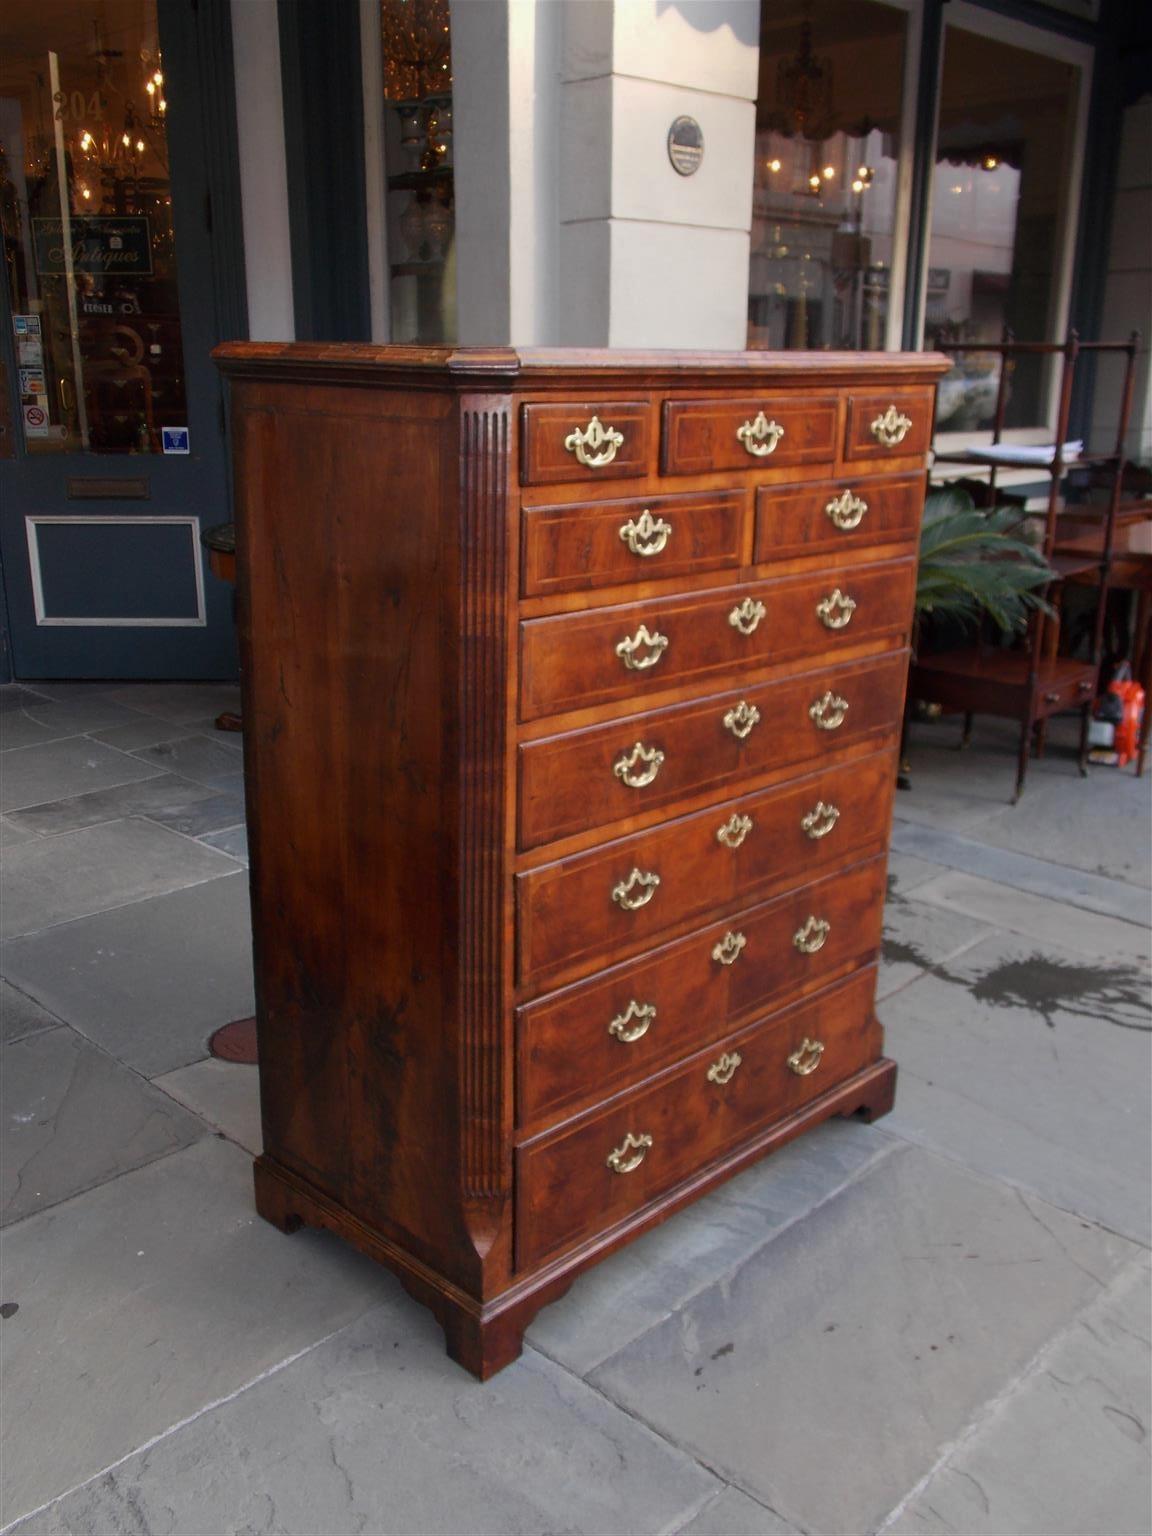 English Early Chippendale burl walnut graduated tall chest with a carved molded edge cornice, flanking fluted side columns, hearing bone inlays, original brasses, and terminating on the original bracket feet, Early 18th century.